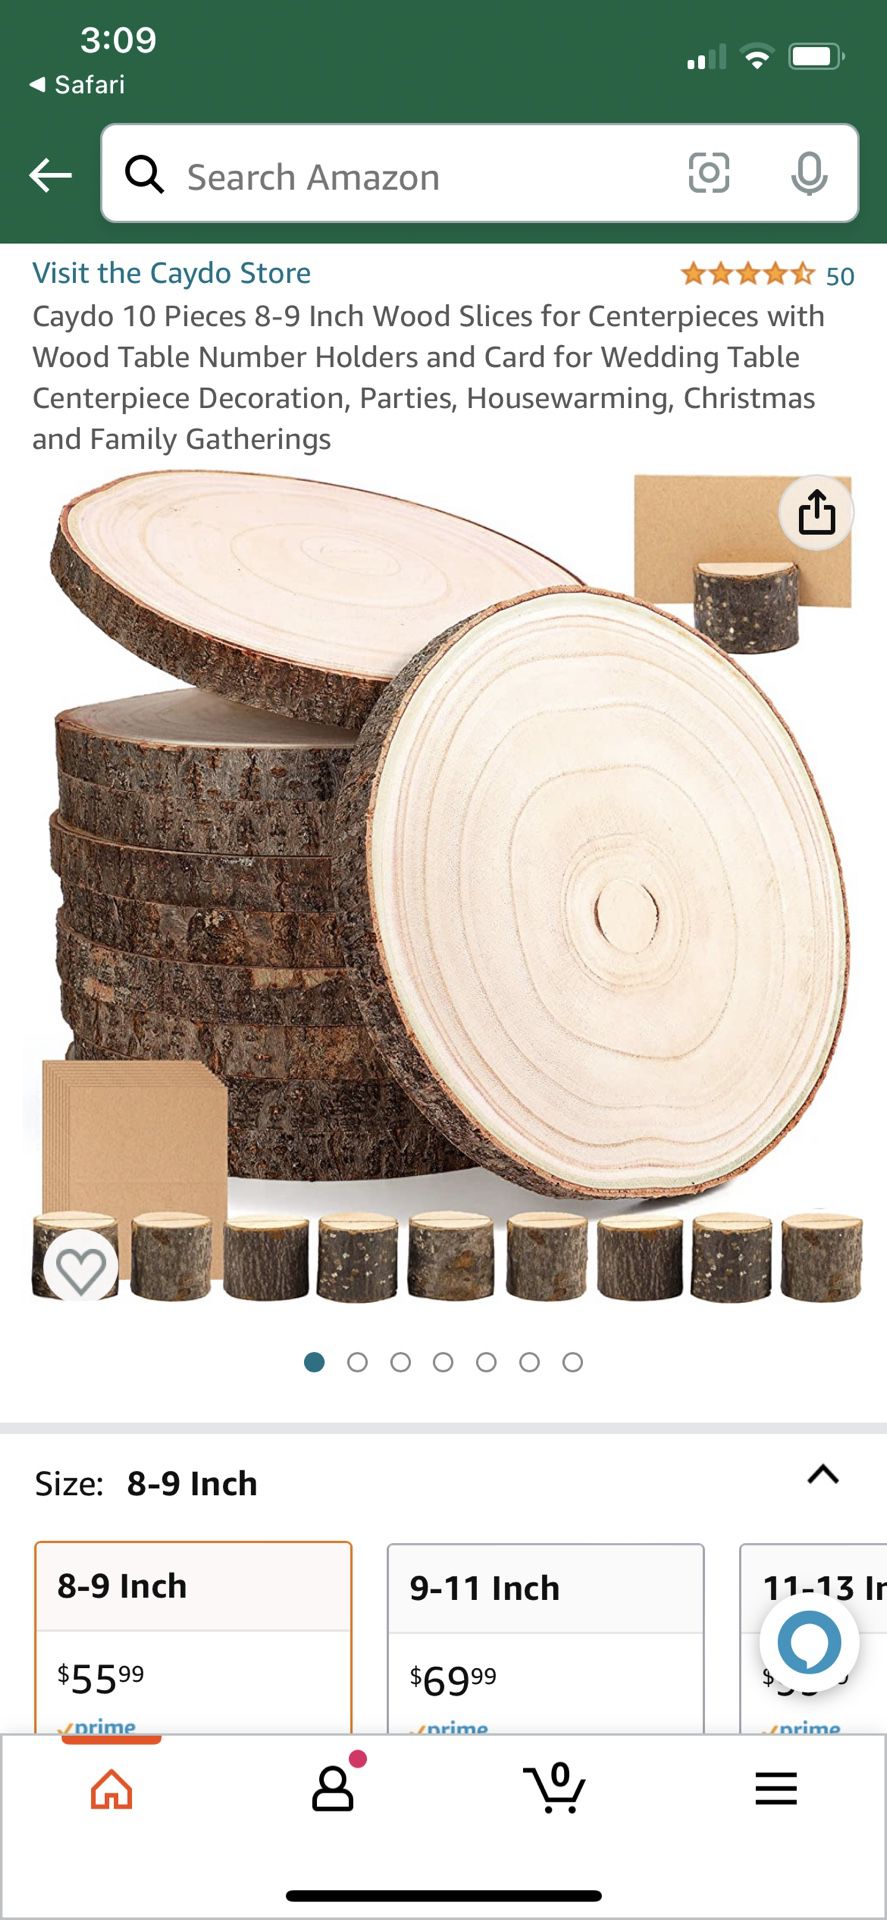  Caydo 10 Pieces 8-9 Inch Wood Slices for Centerpieces with Wood  Table Number Holders and Card for Wedding Table Centerpiece Decoration,  Parties, Housewarming and Family Gatherings